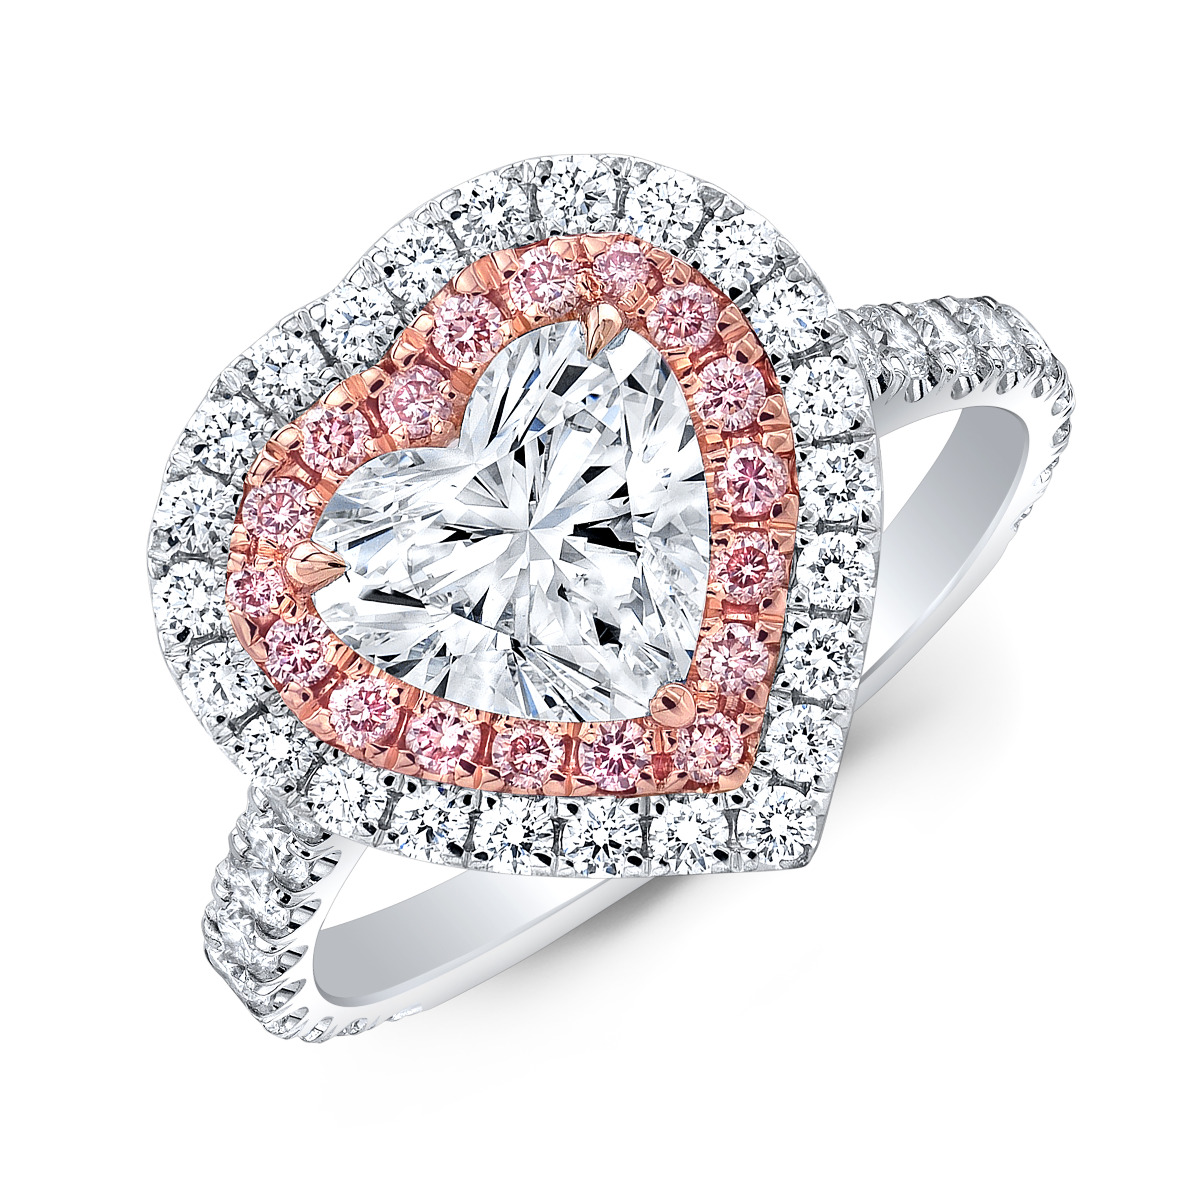 Heart Shaped Pink Diamond Halo Engagement Ring with Pave | Sunny Eden